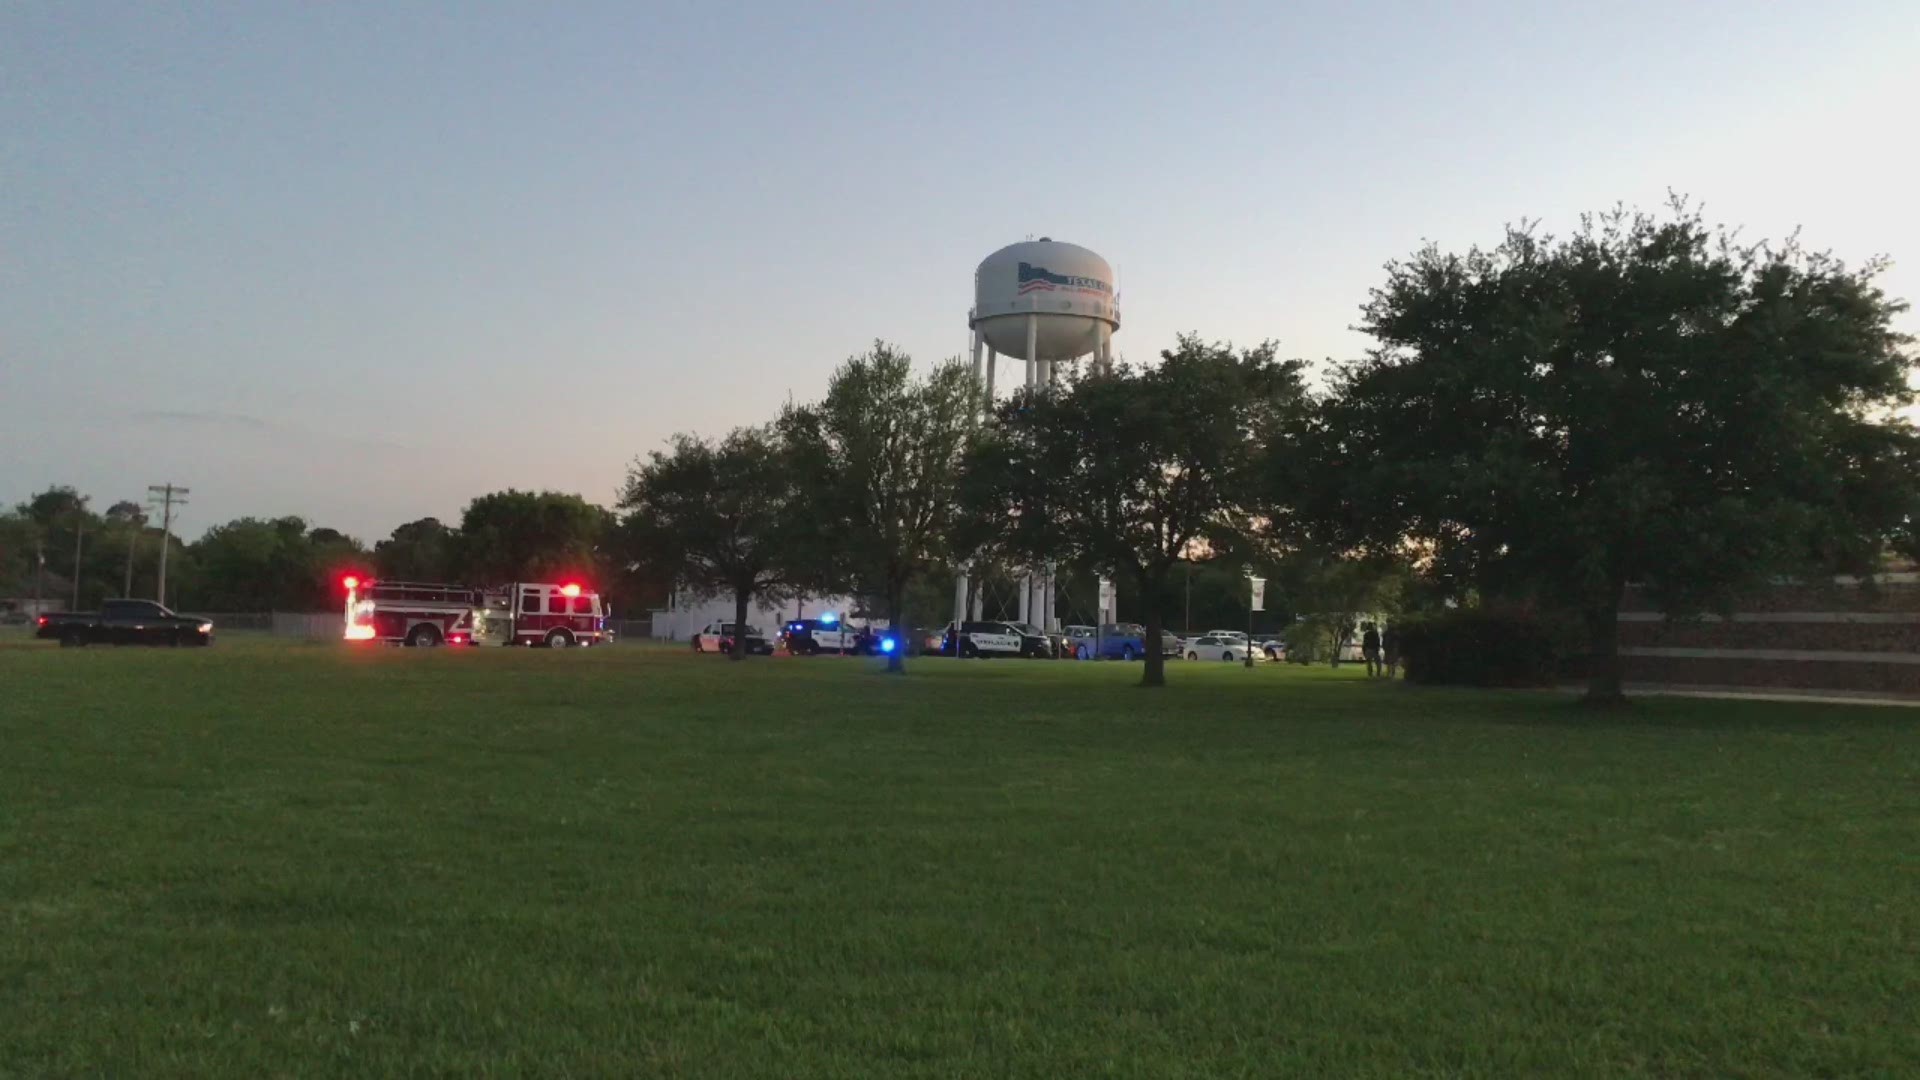 Three police cadets injured after accidental gun discharge in Texas City.